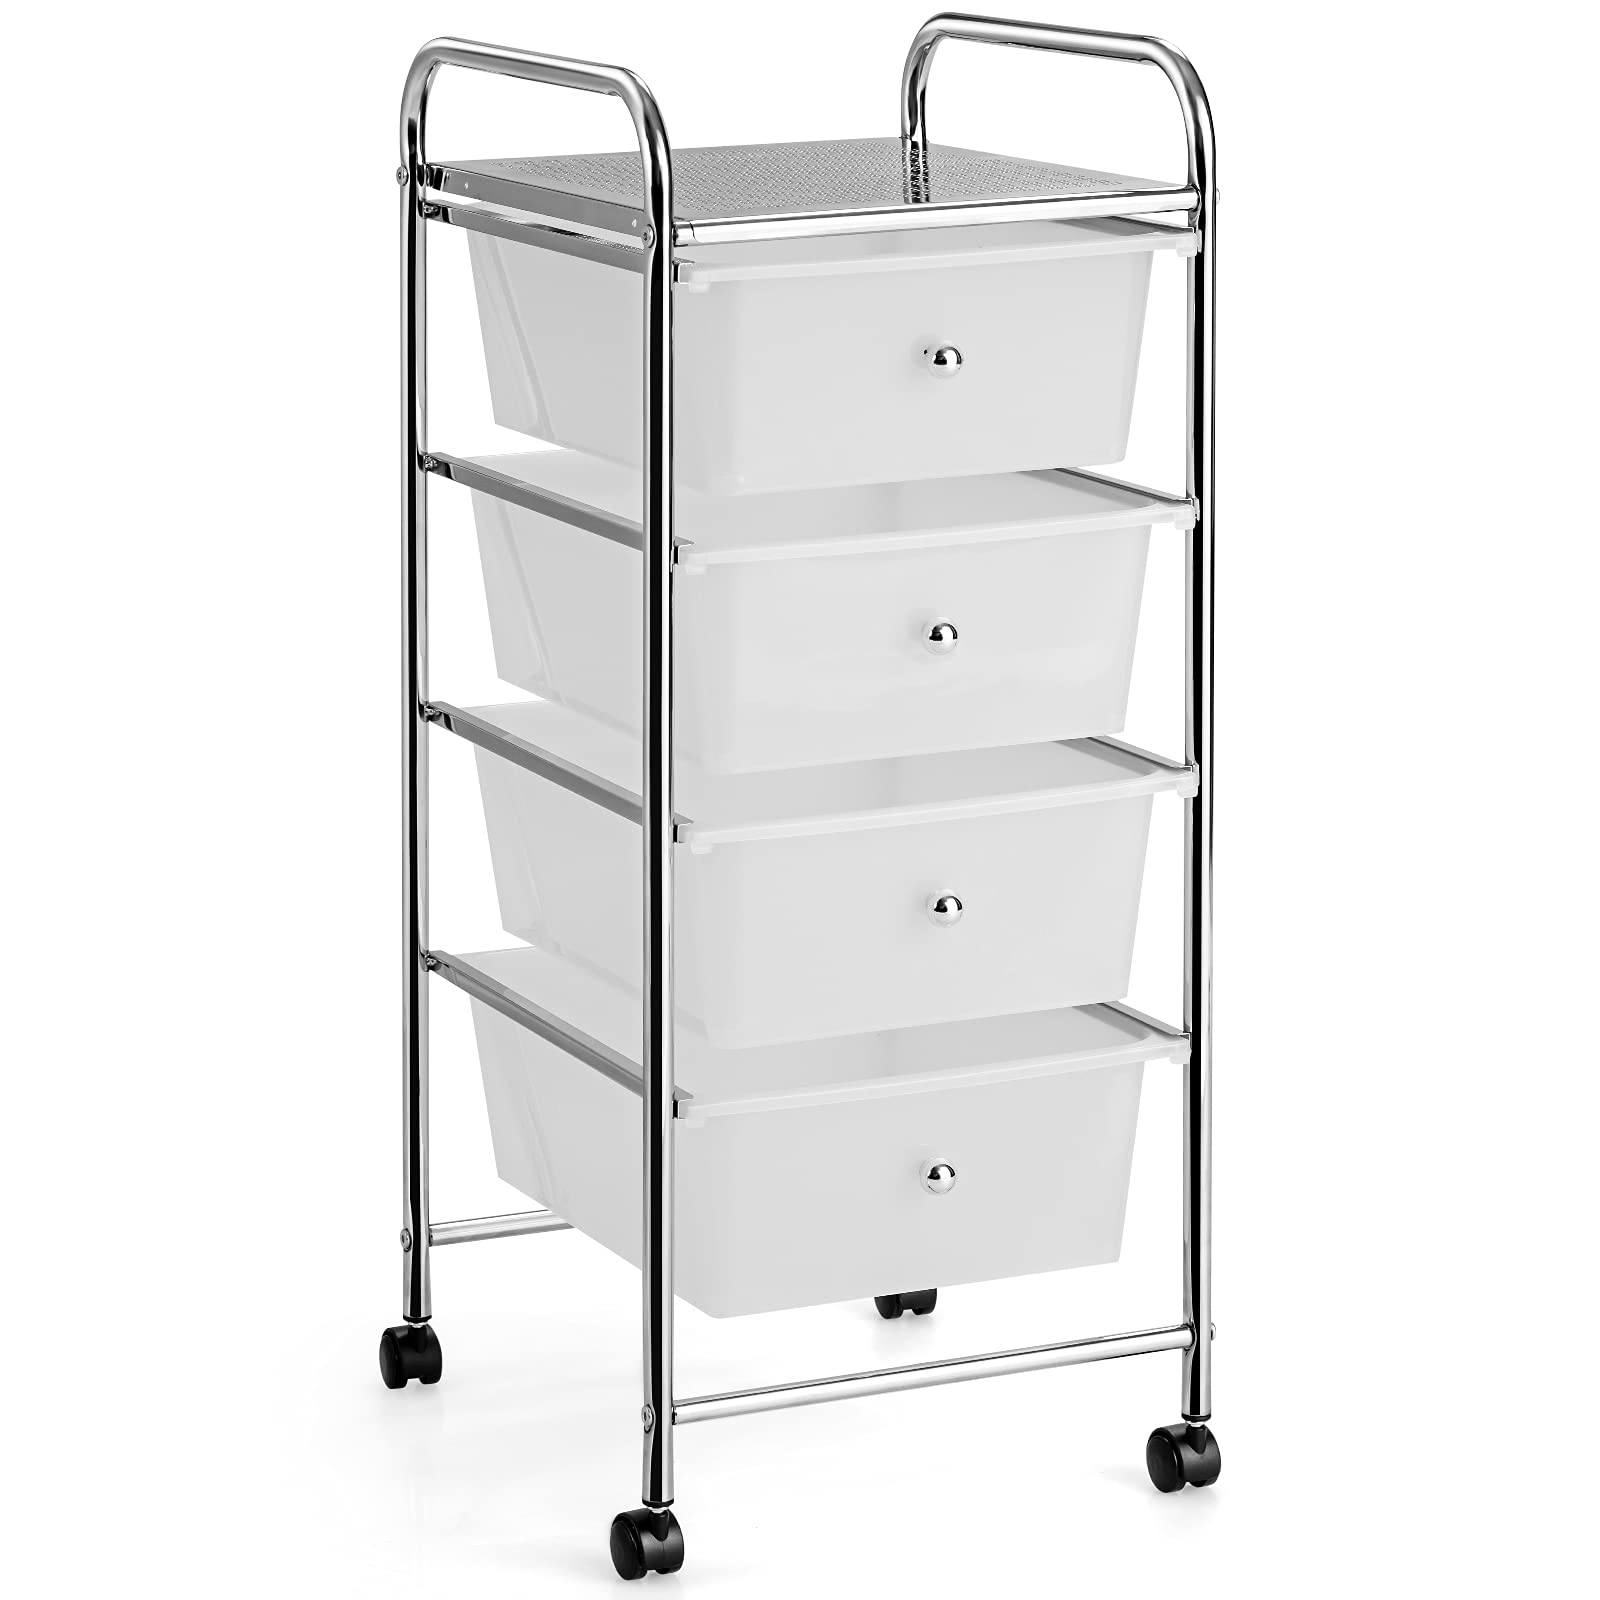 RELAX4LIFE Storage Drawer Carts Classroom Organization Rolling Carts with Wheels 4 Drawers -Craft Organizing Drawers with Plastic Drawers, Utility Cart for Office, School Storage Cart (Clear)